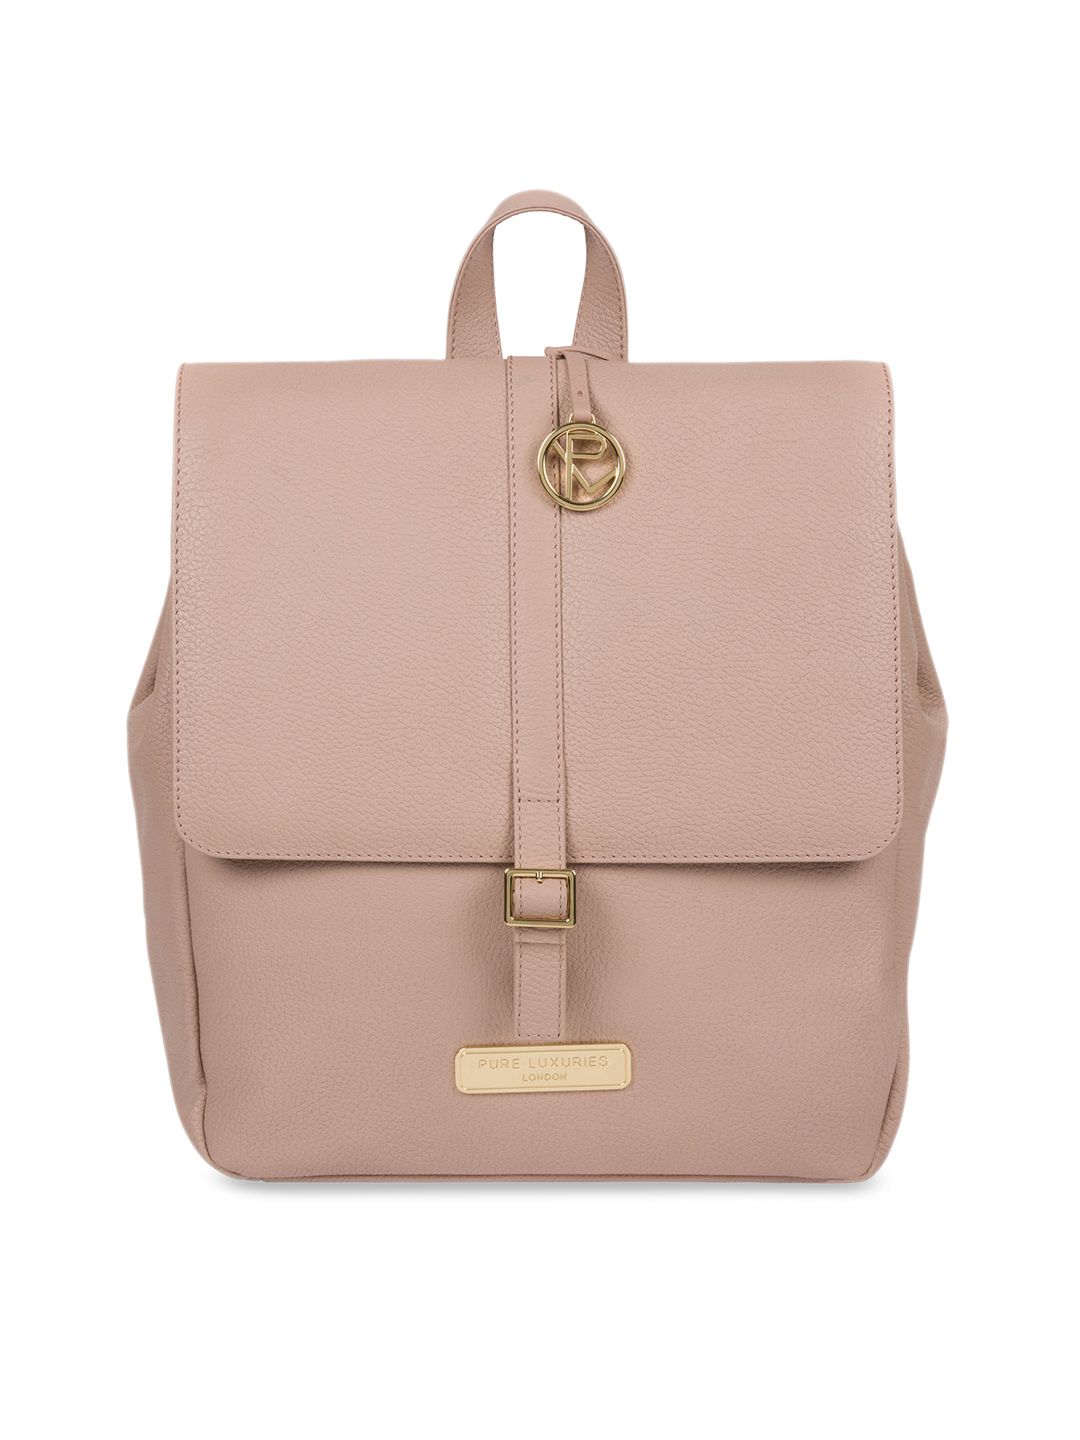 PURE LUXURIES LONDON Women Pink Solid Genuine Leather Daisy Backpack Price in India